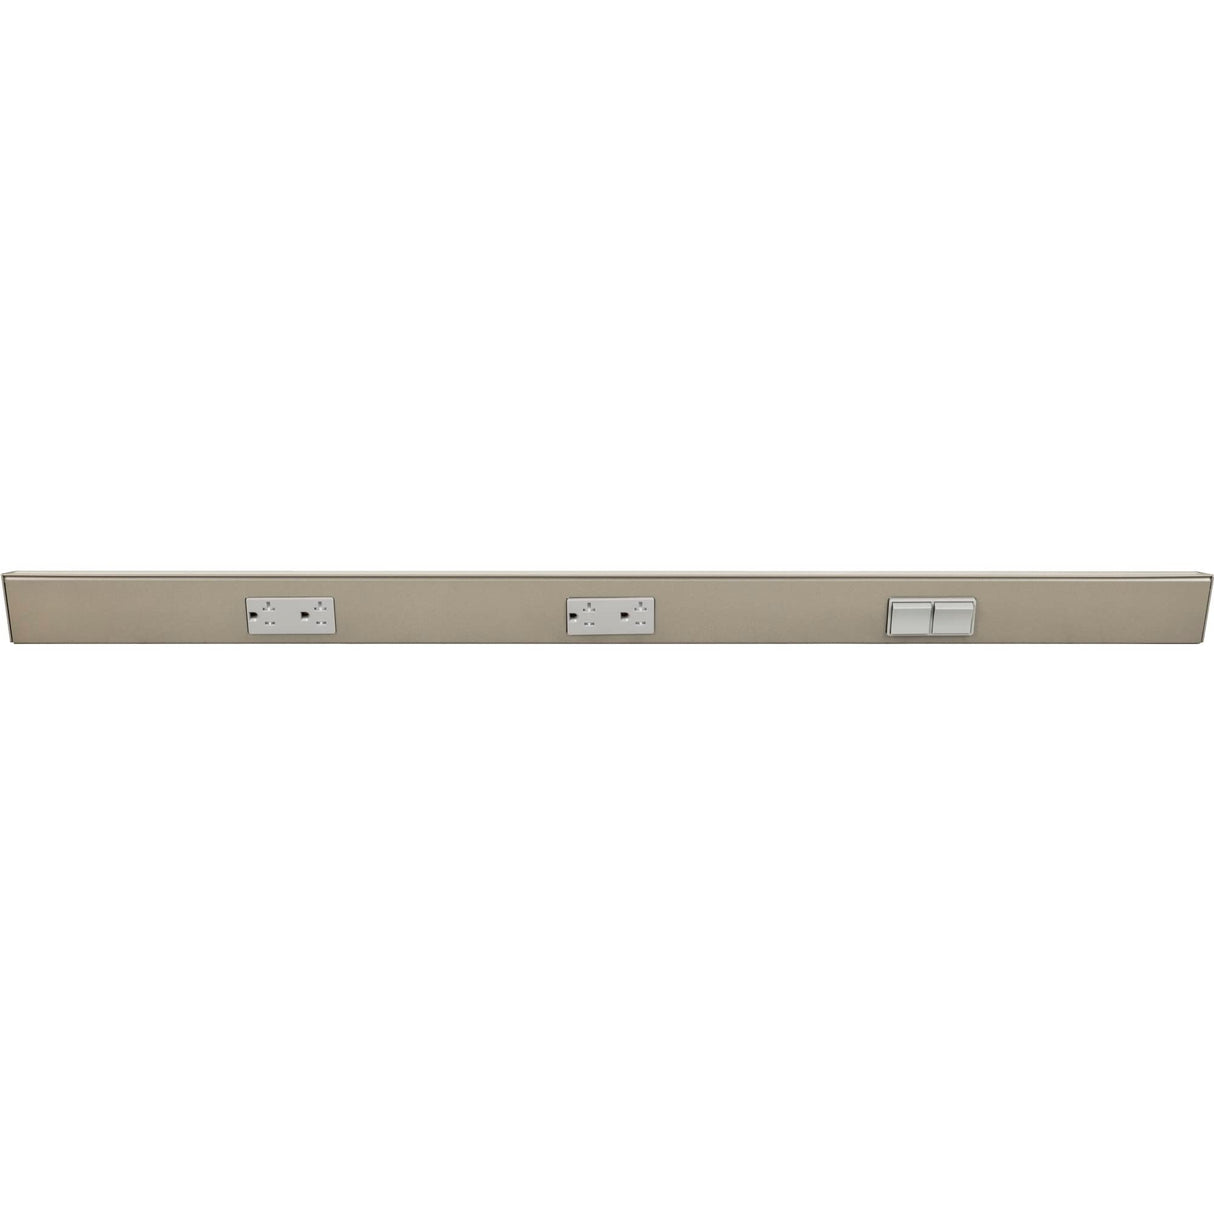 Task Lighting TRS36-3G-SN-RS 36" TR Switch Series Angle Power Strip, Right Switches, Satin Nickel Finish, Grey Switches and Receptacles